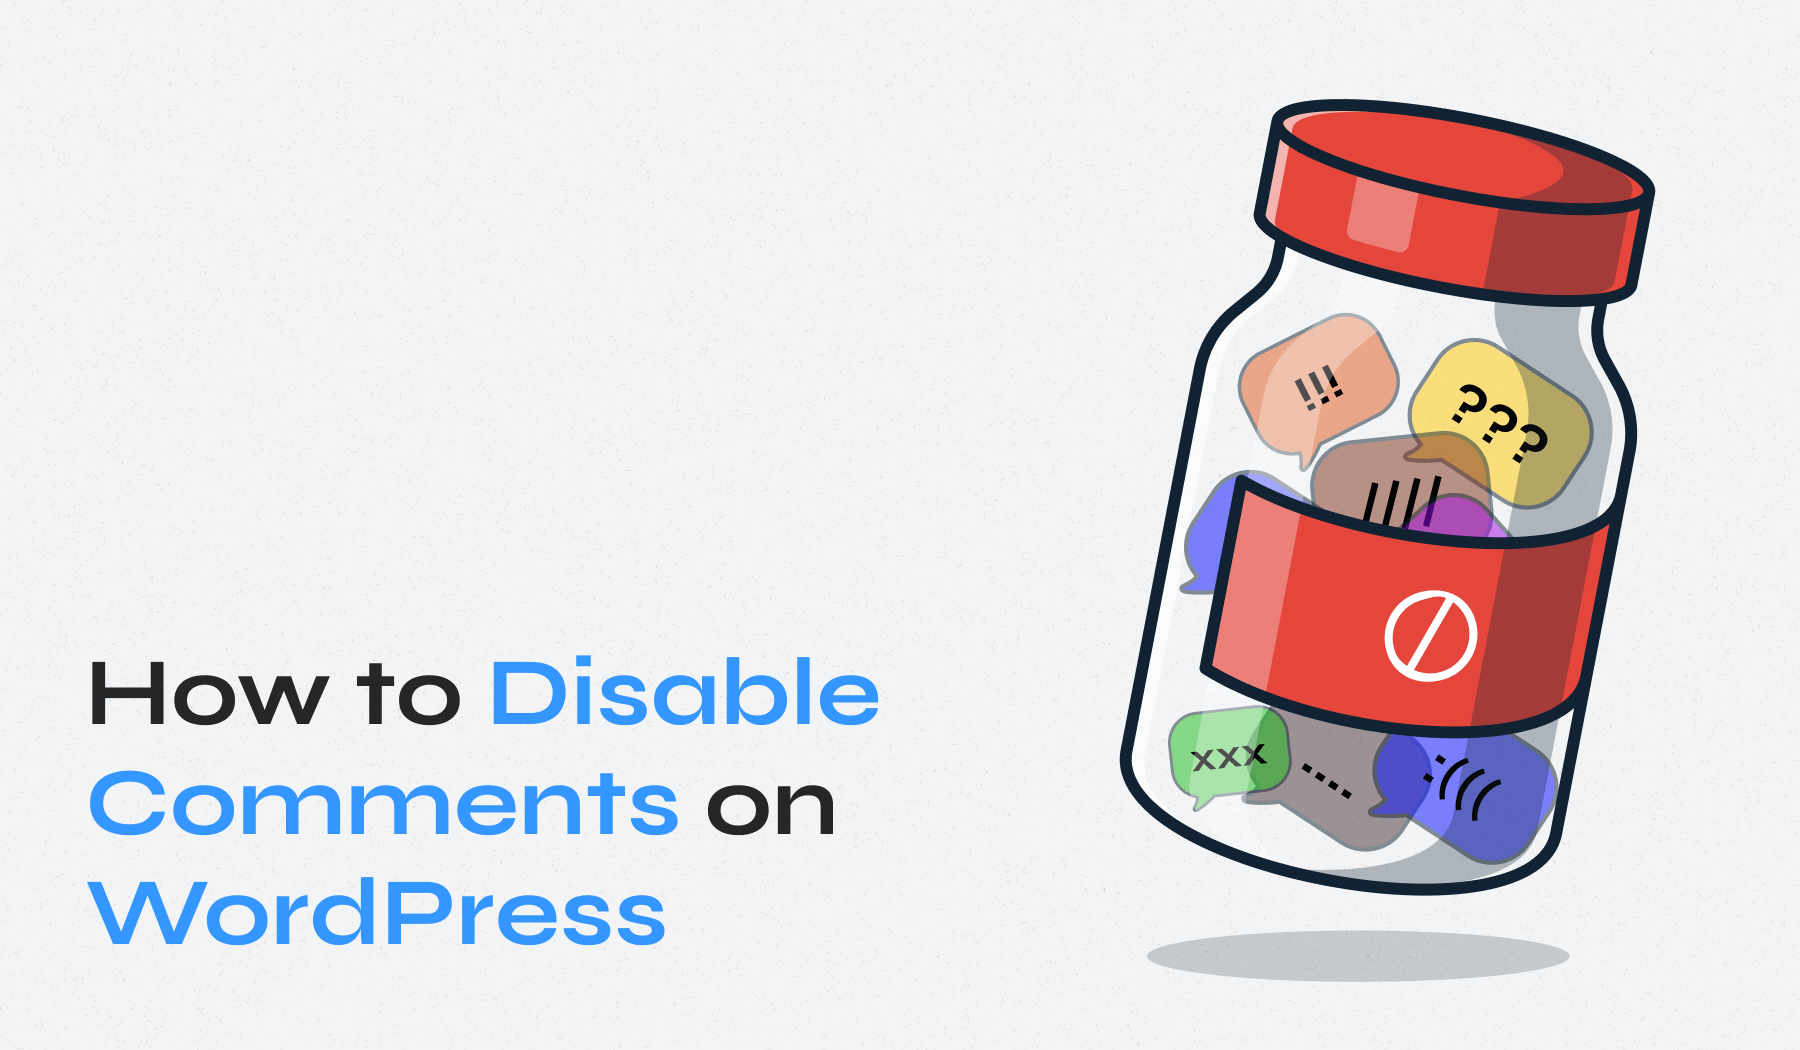 How to Disable Comments on WordPress